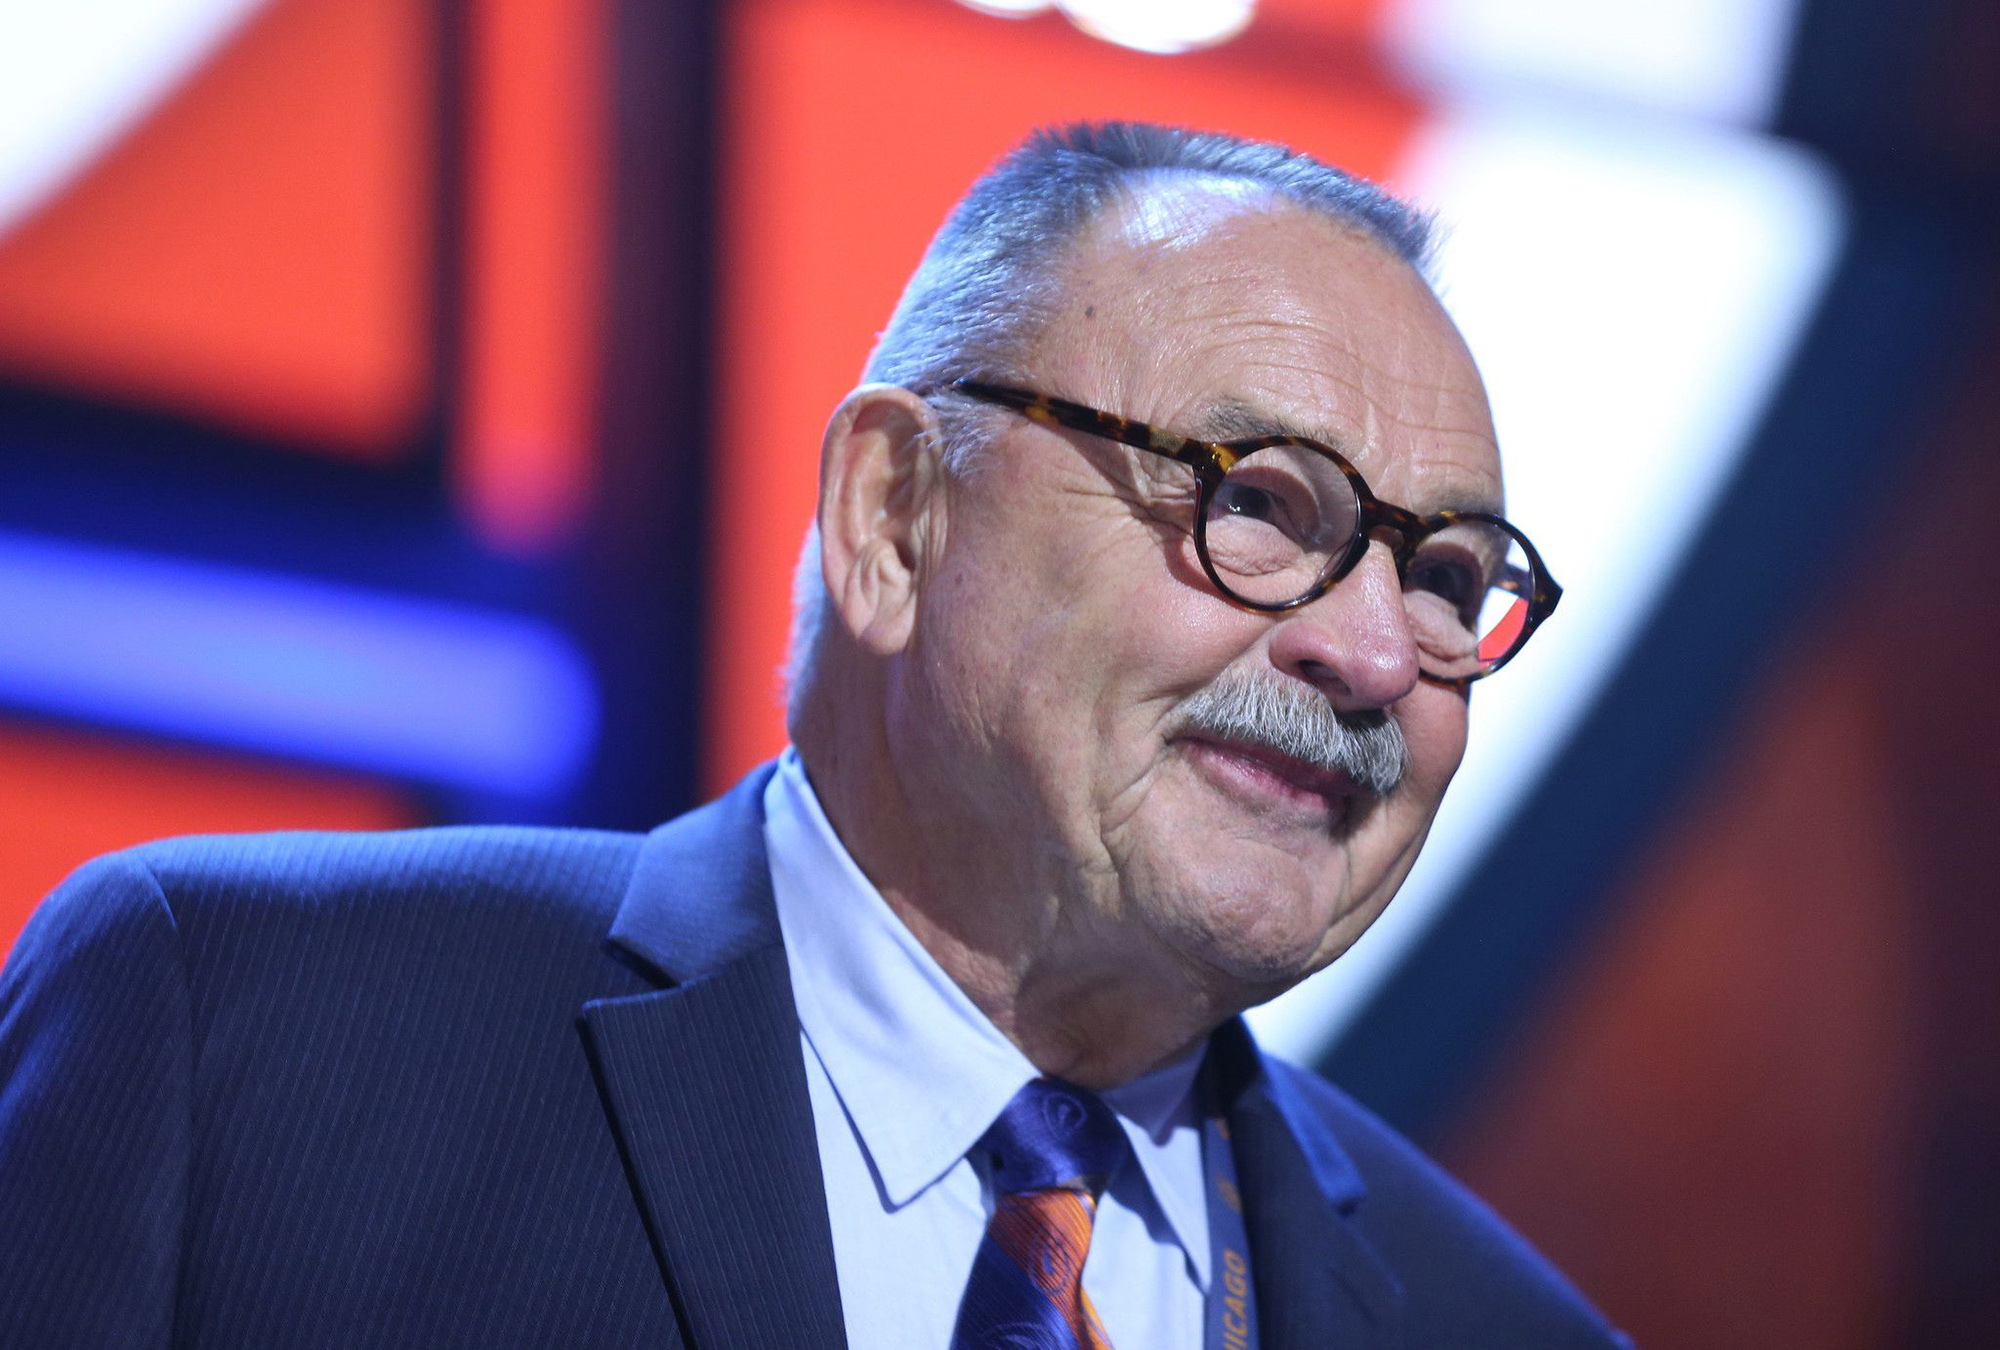 Dick Butkus wasn't given a mention in the segment